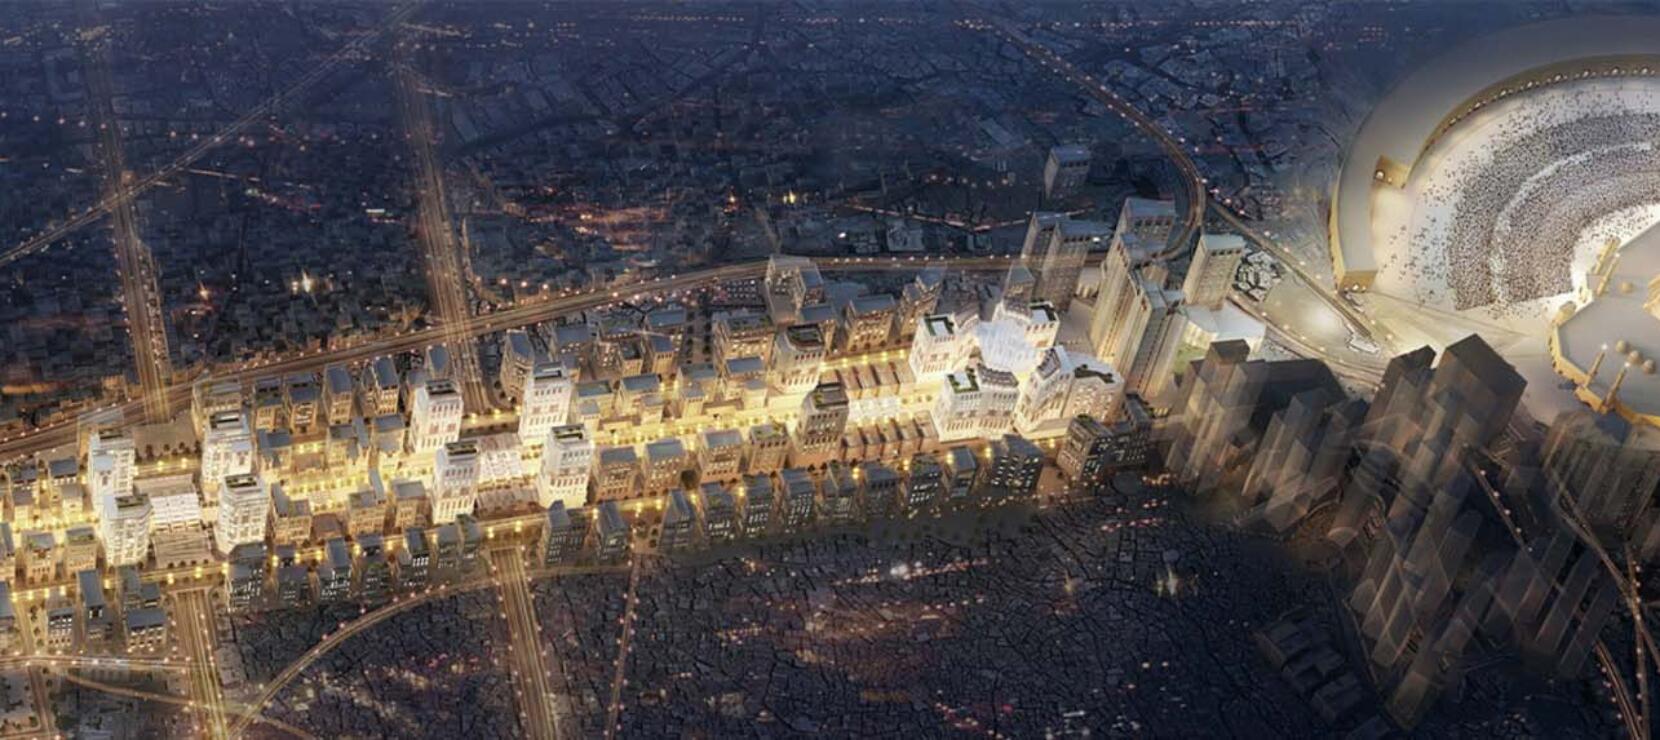 Megaproject Awarded: The MASAR Project in Saudi Arabia